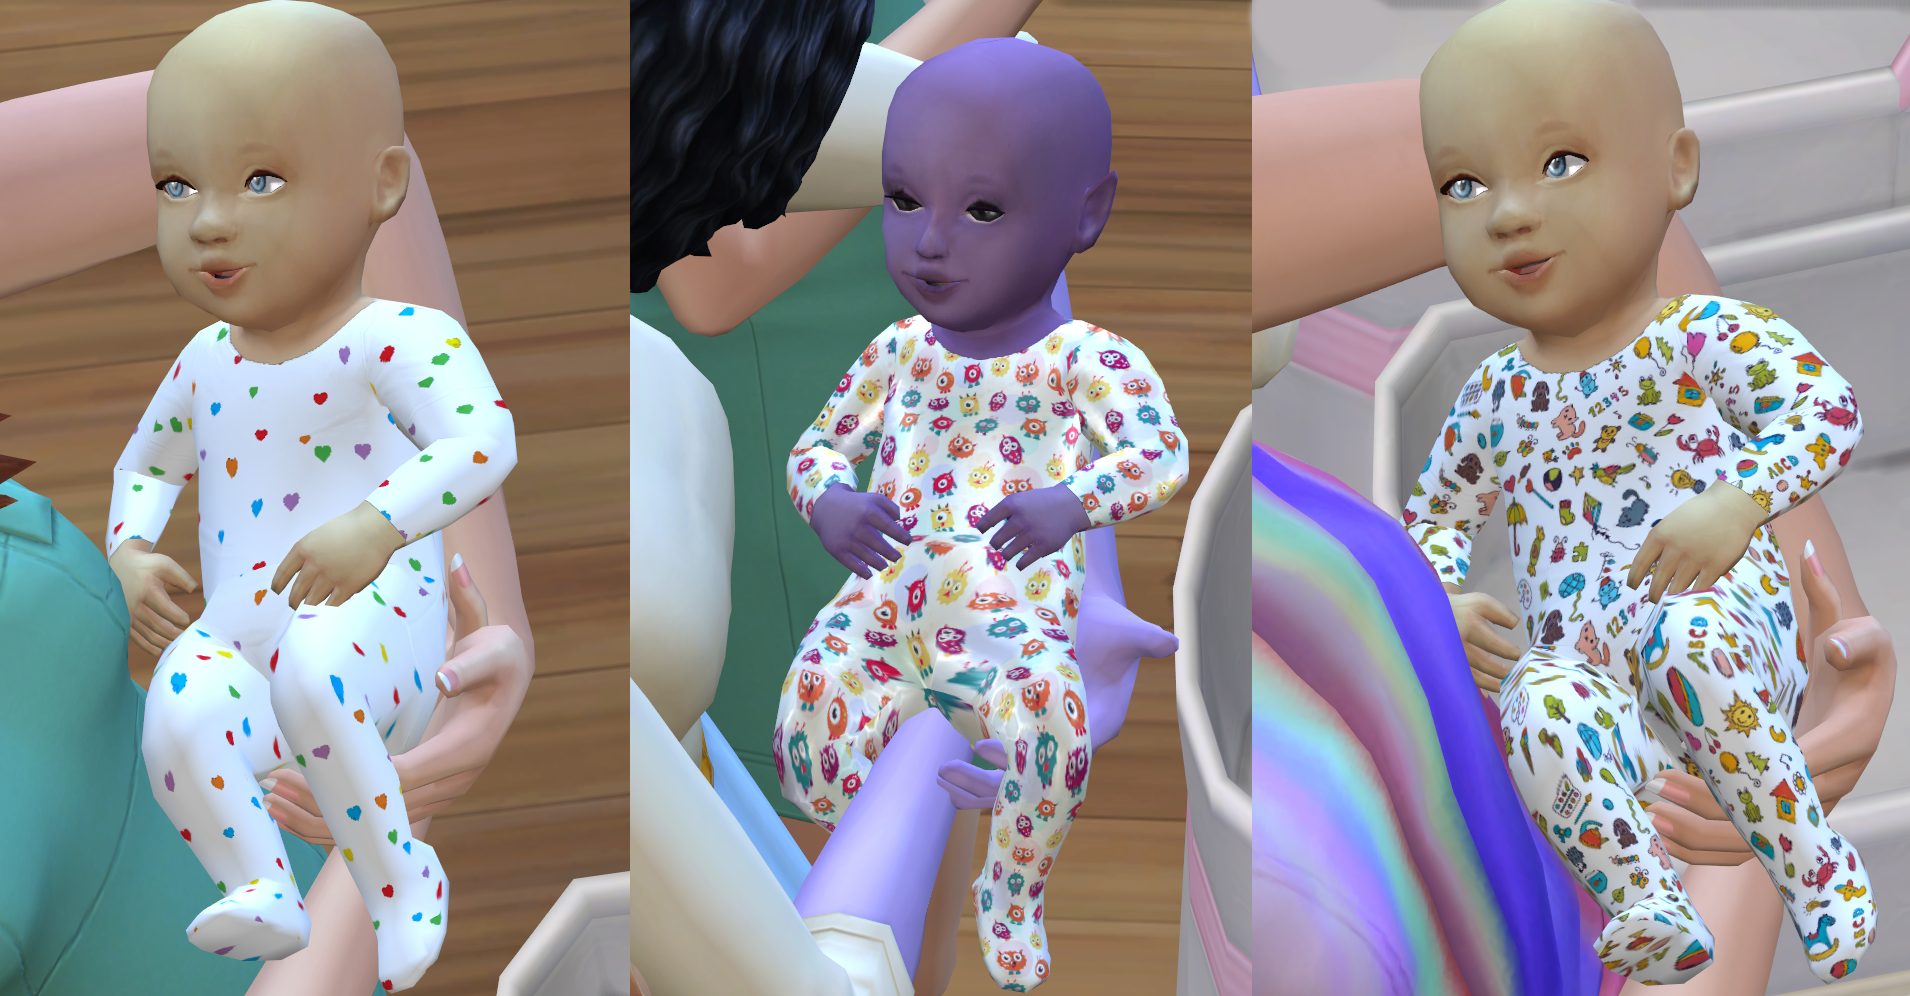 Mixset 6 baby outfit - Screenshots - The Sims 4 Mods - CurseForge